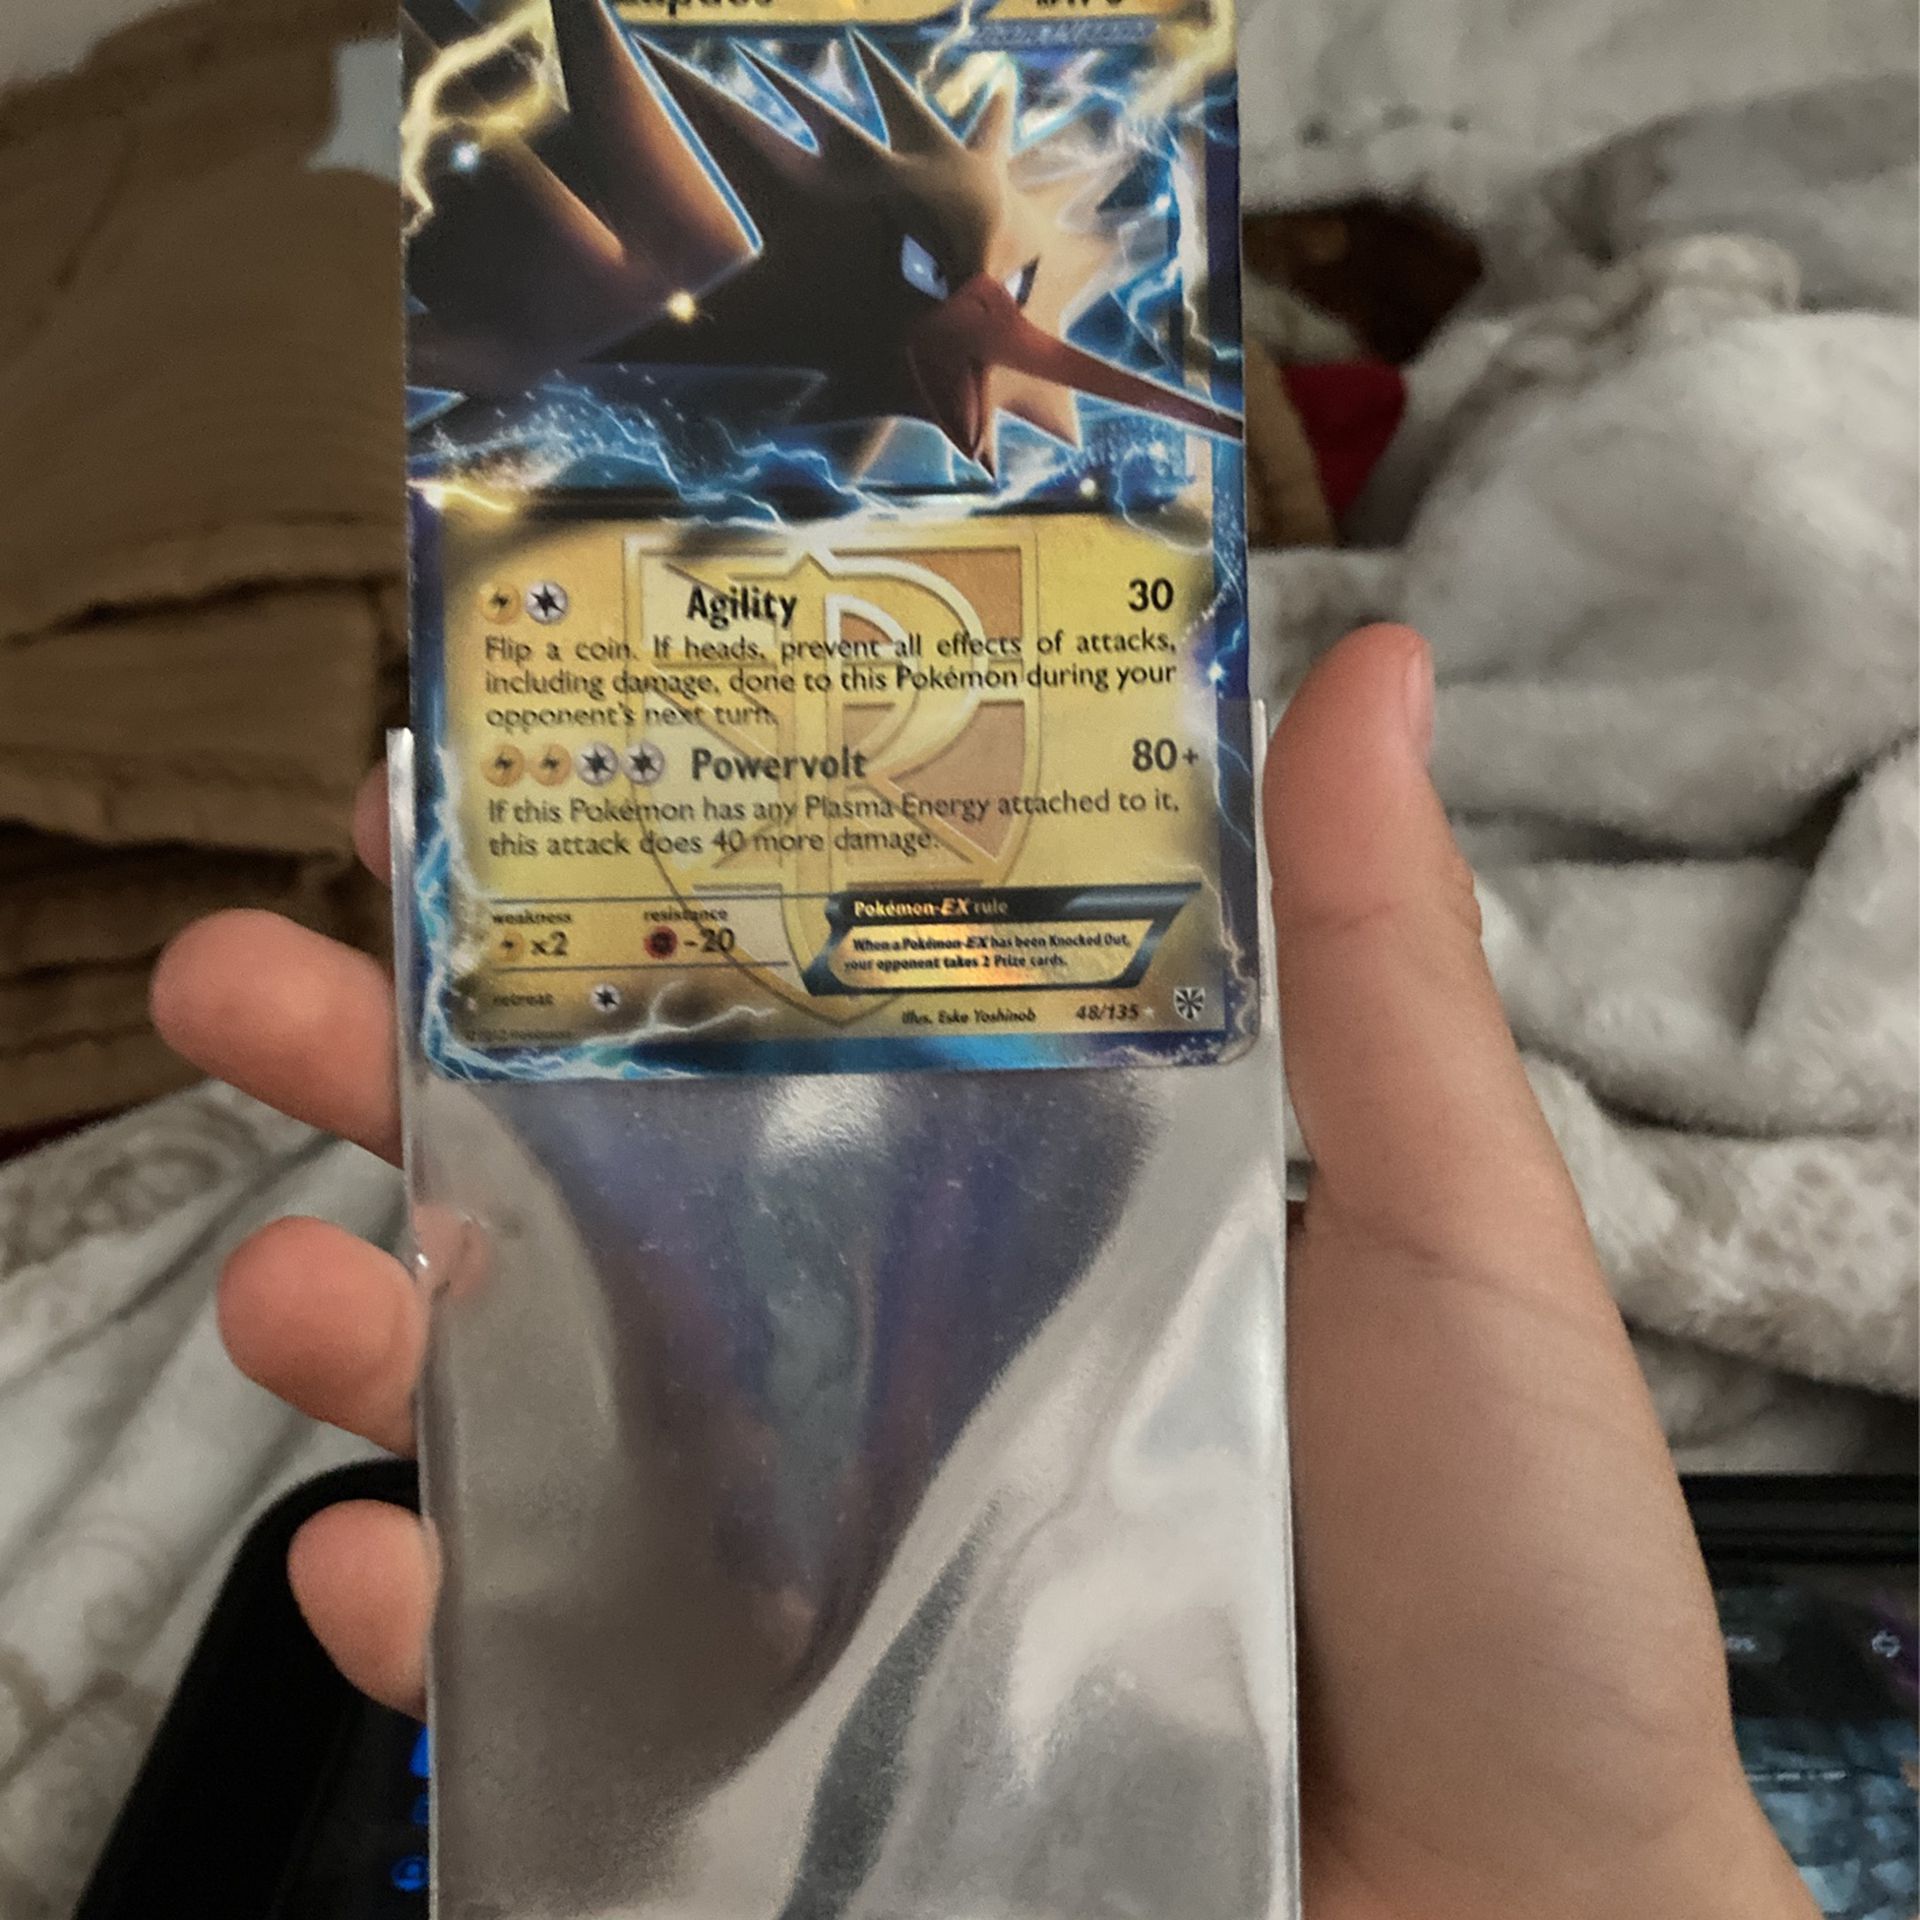 Galarian Gallery Deoxys Vmax for Sale in Wahneta, FL - OfferUp